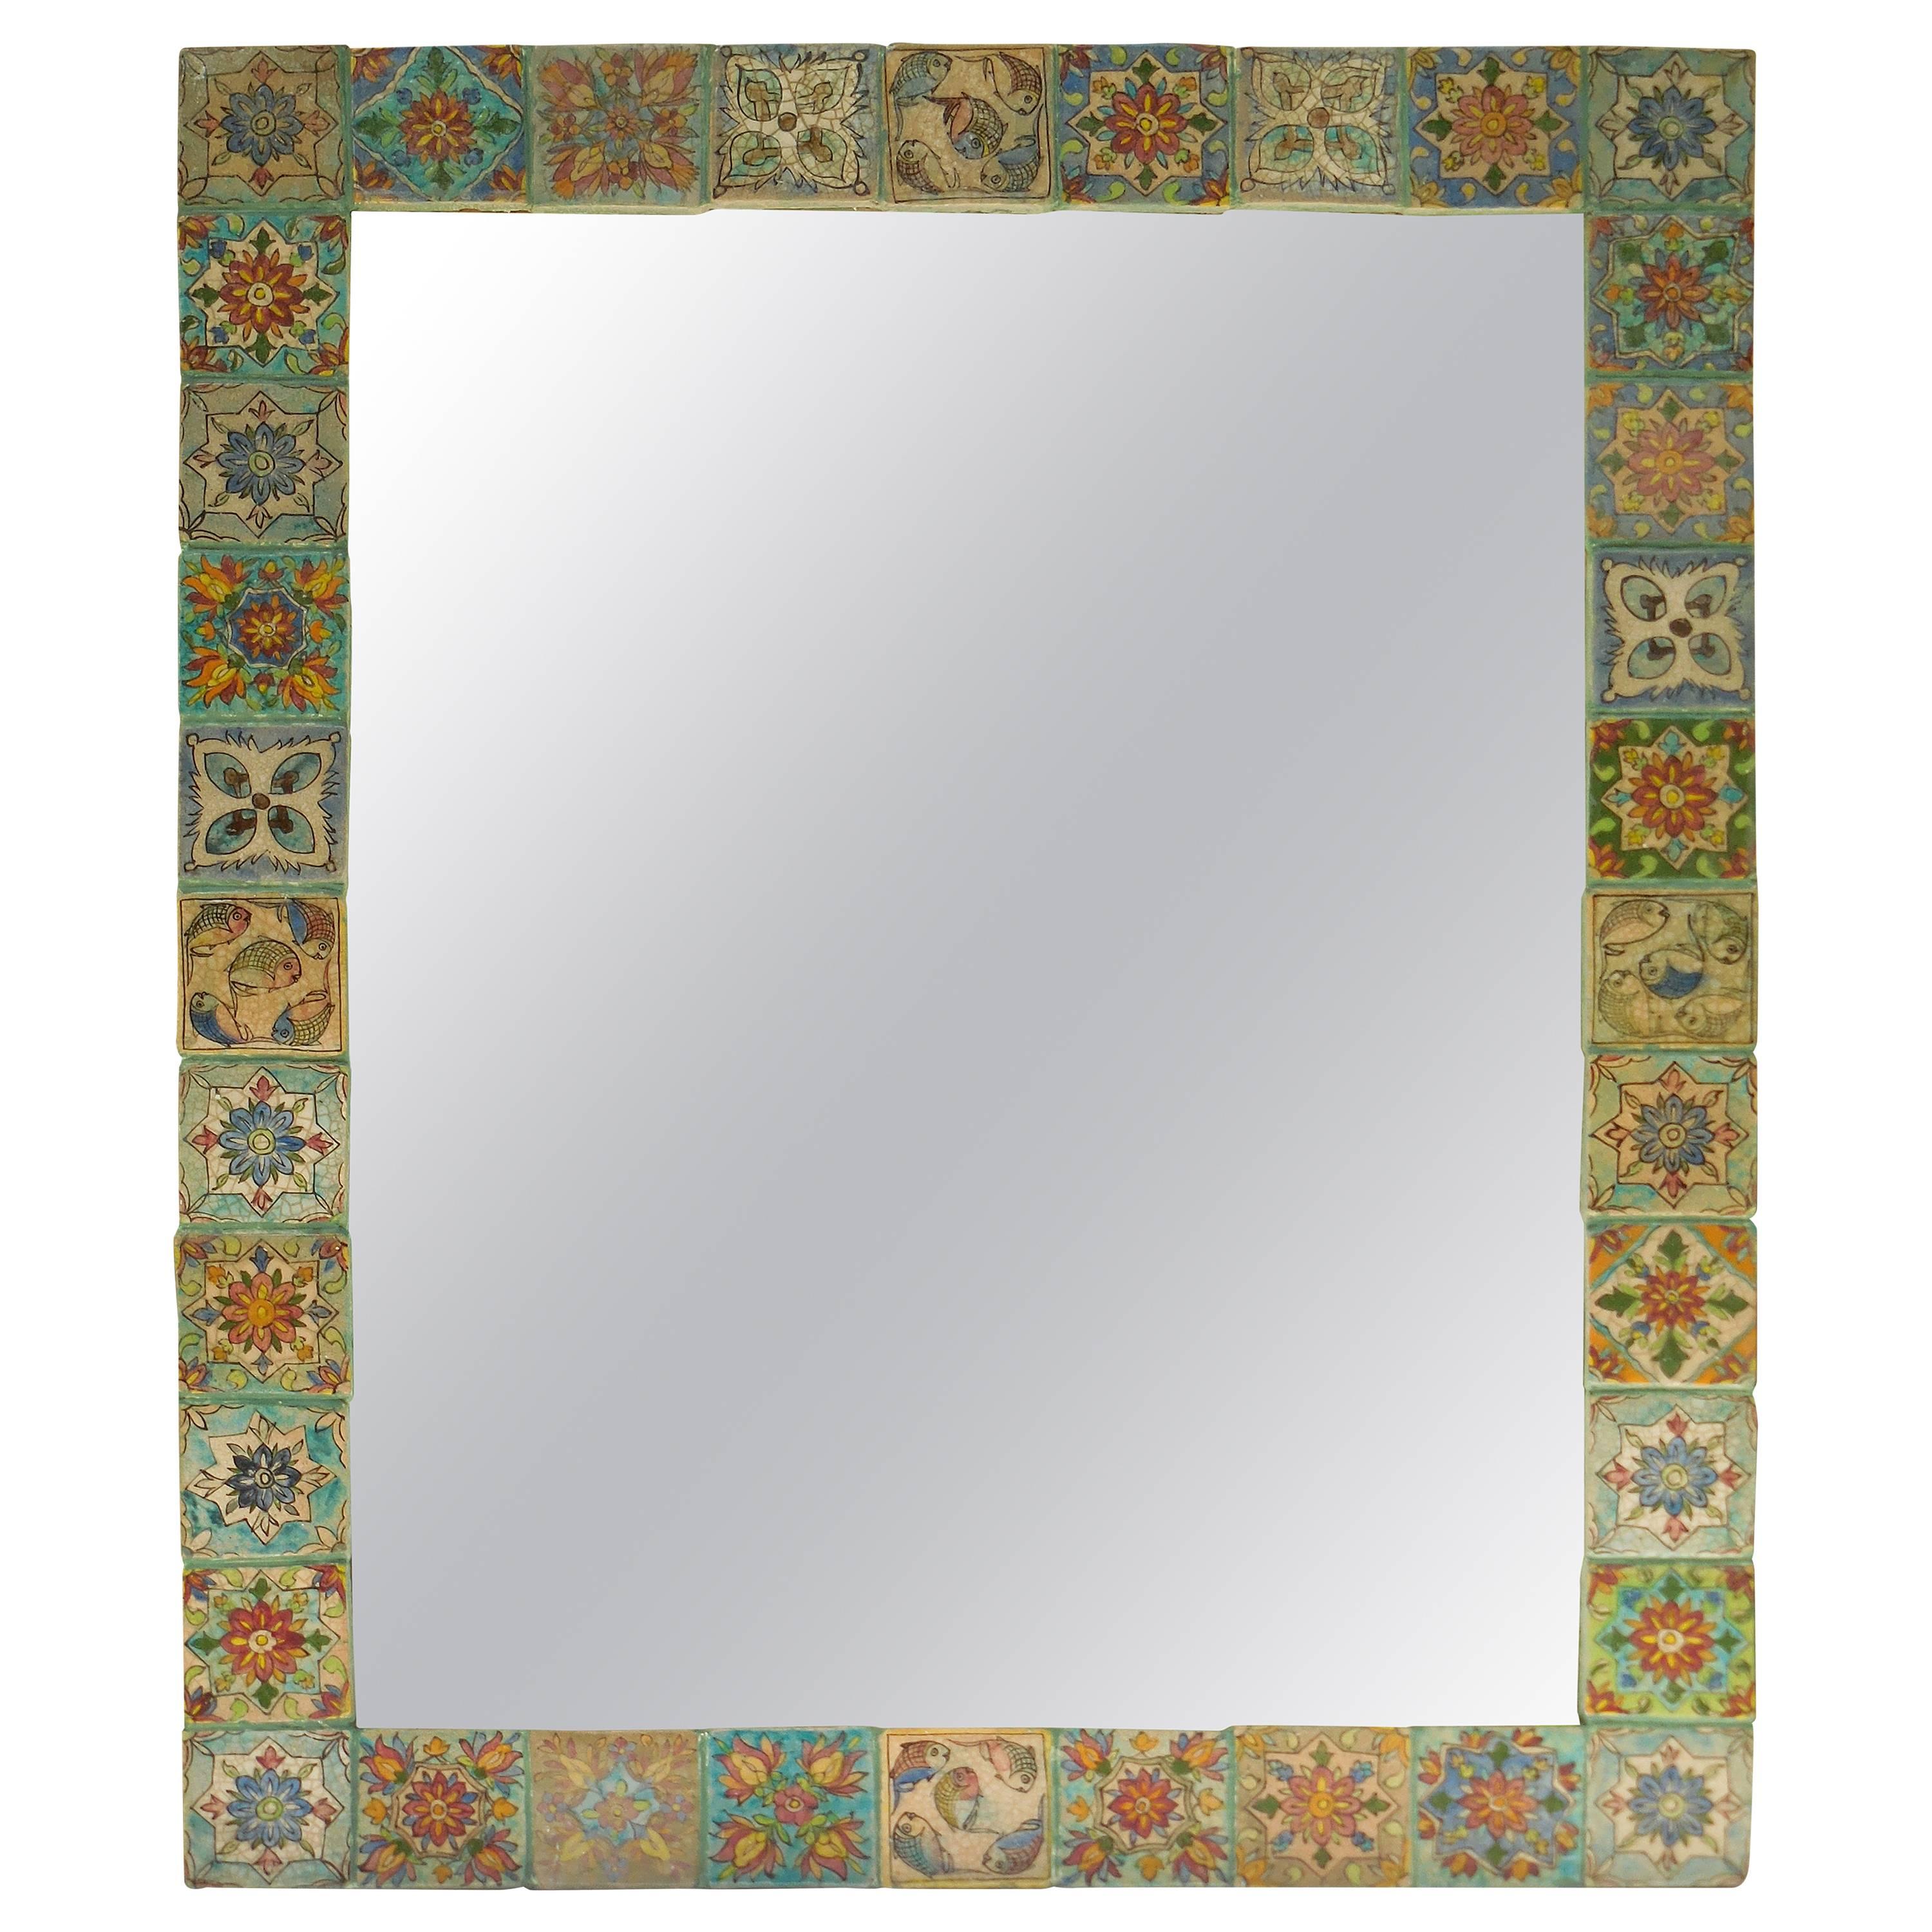 Large One of a Kind Persian Tile Mirror